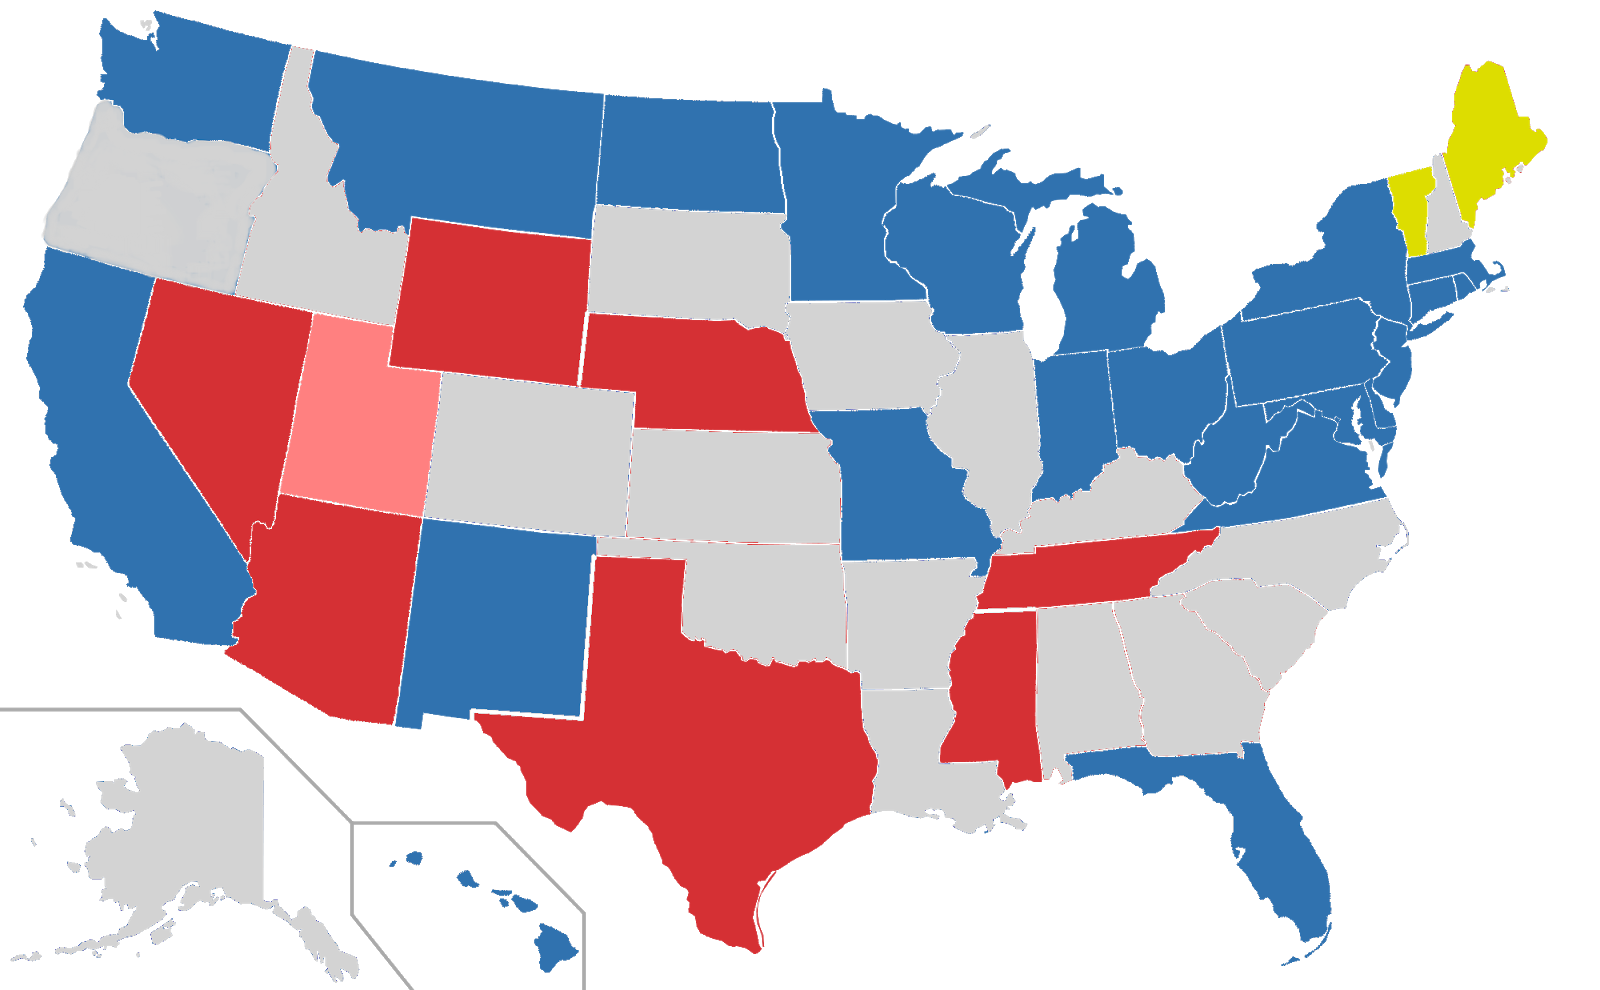 United+States+map+depicting+election+results+for+the+US+Senate+in+2018